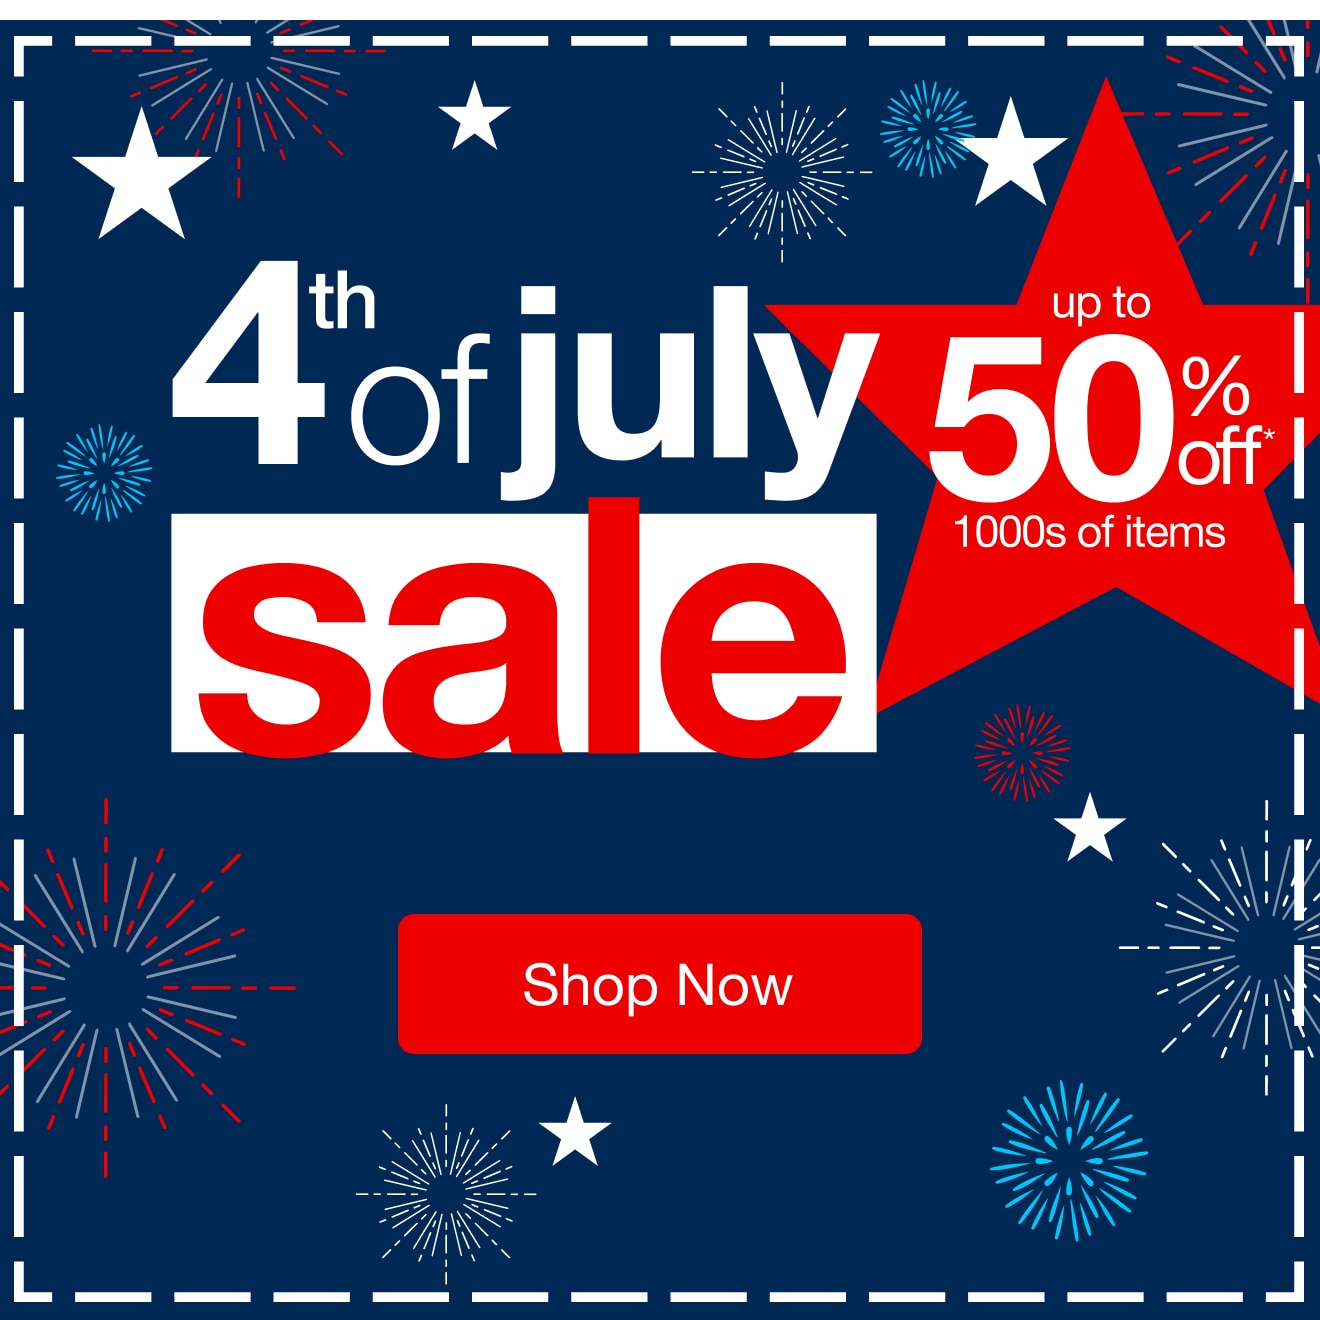 4th of July Sale Up to 50% off 1000s of Items